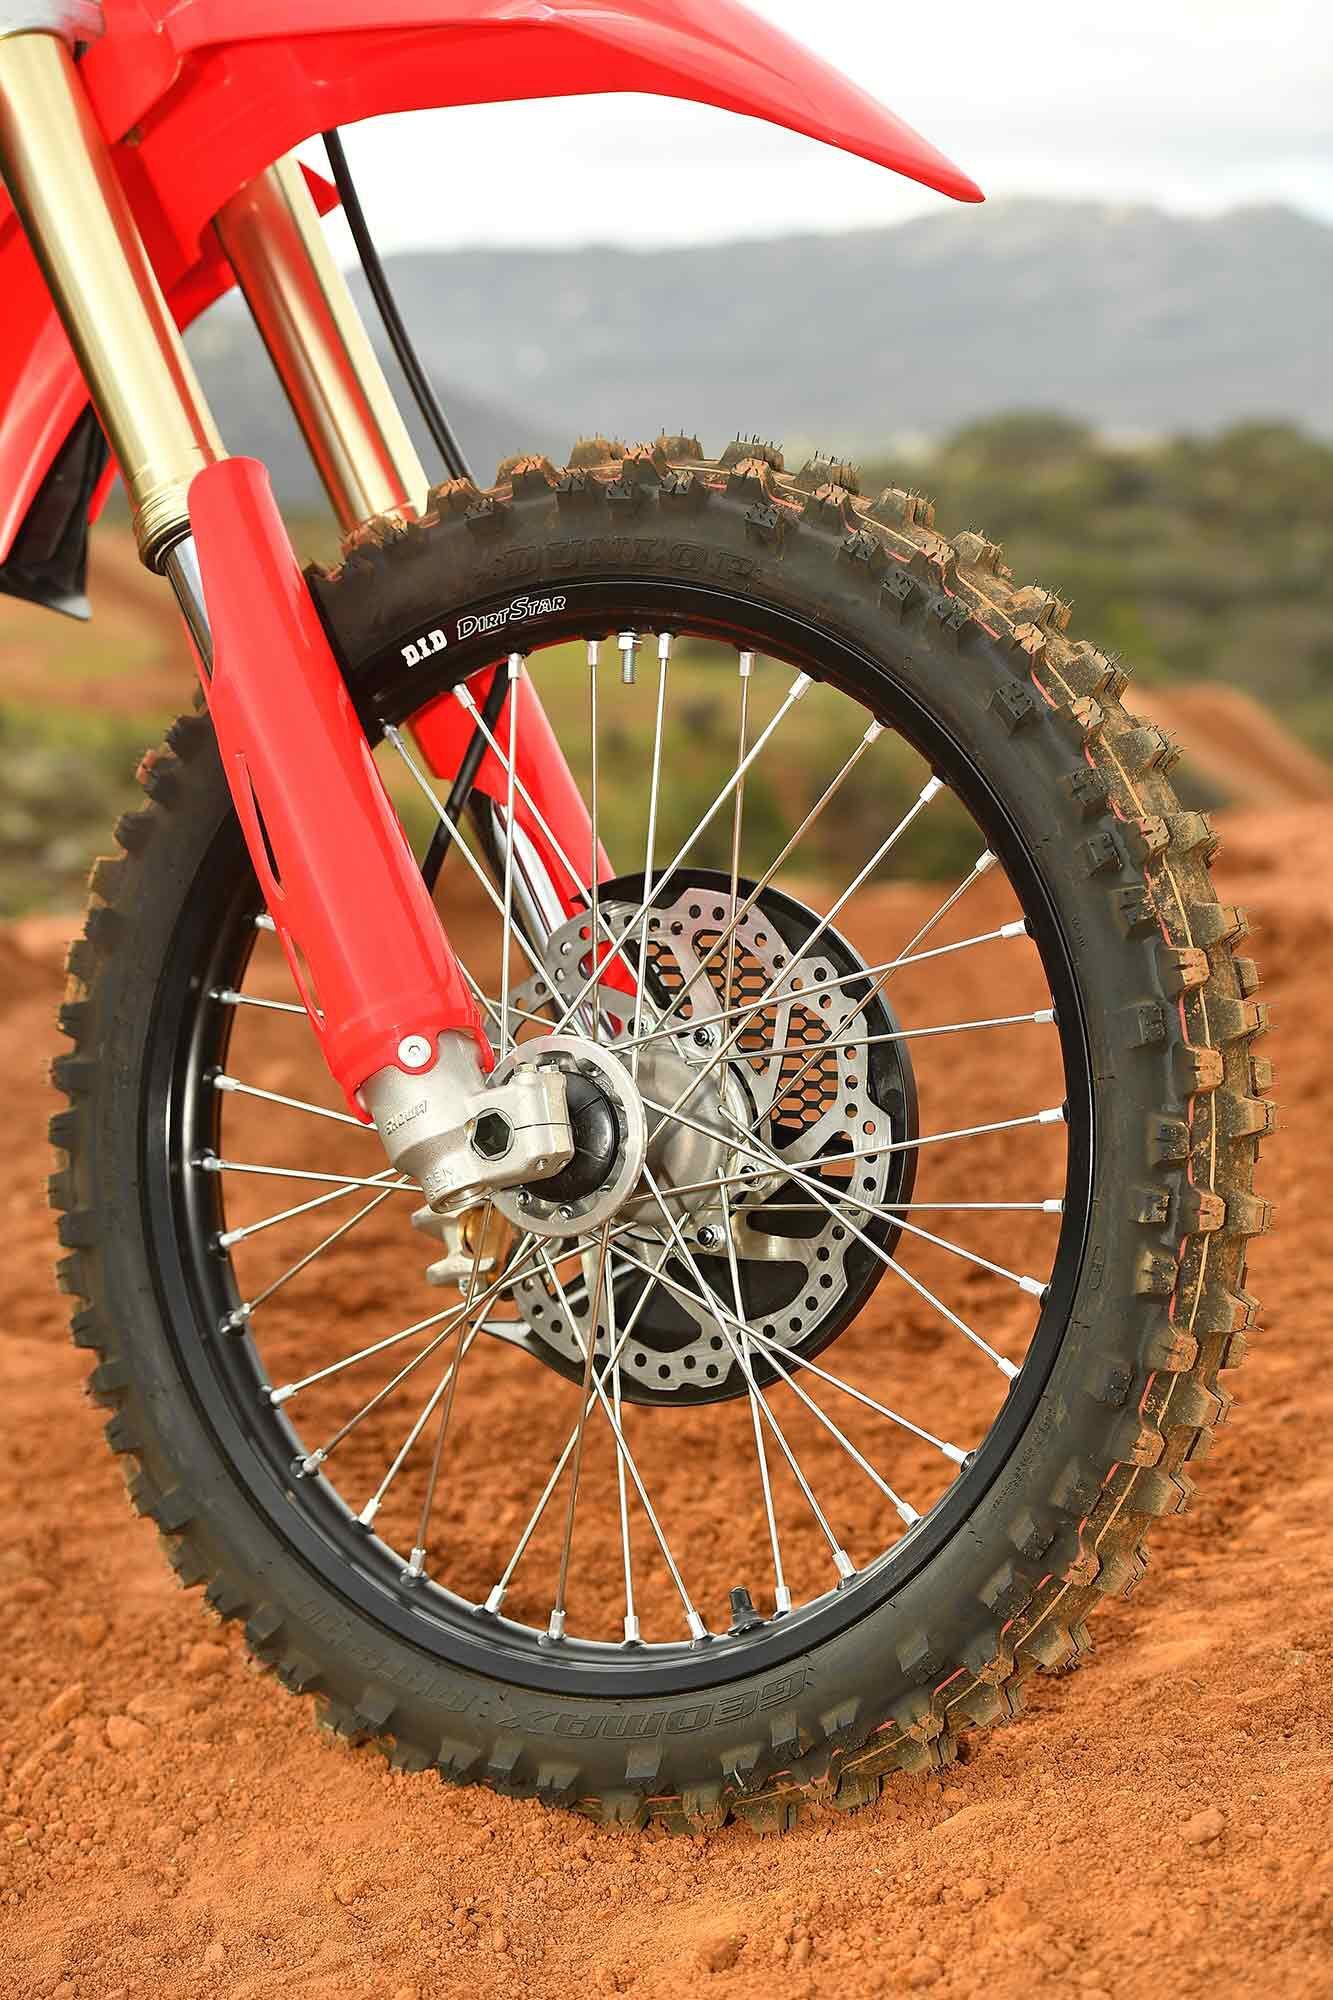 A 260mm front brake rotor really stops the lightweight CRF450RX in a hurry. Honda has always had great brakes, with solid modulation and an accurate feel. 2023 brings more of the same for potential Red Riders.